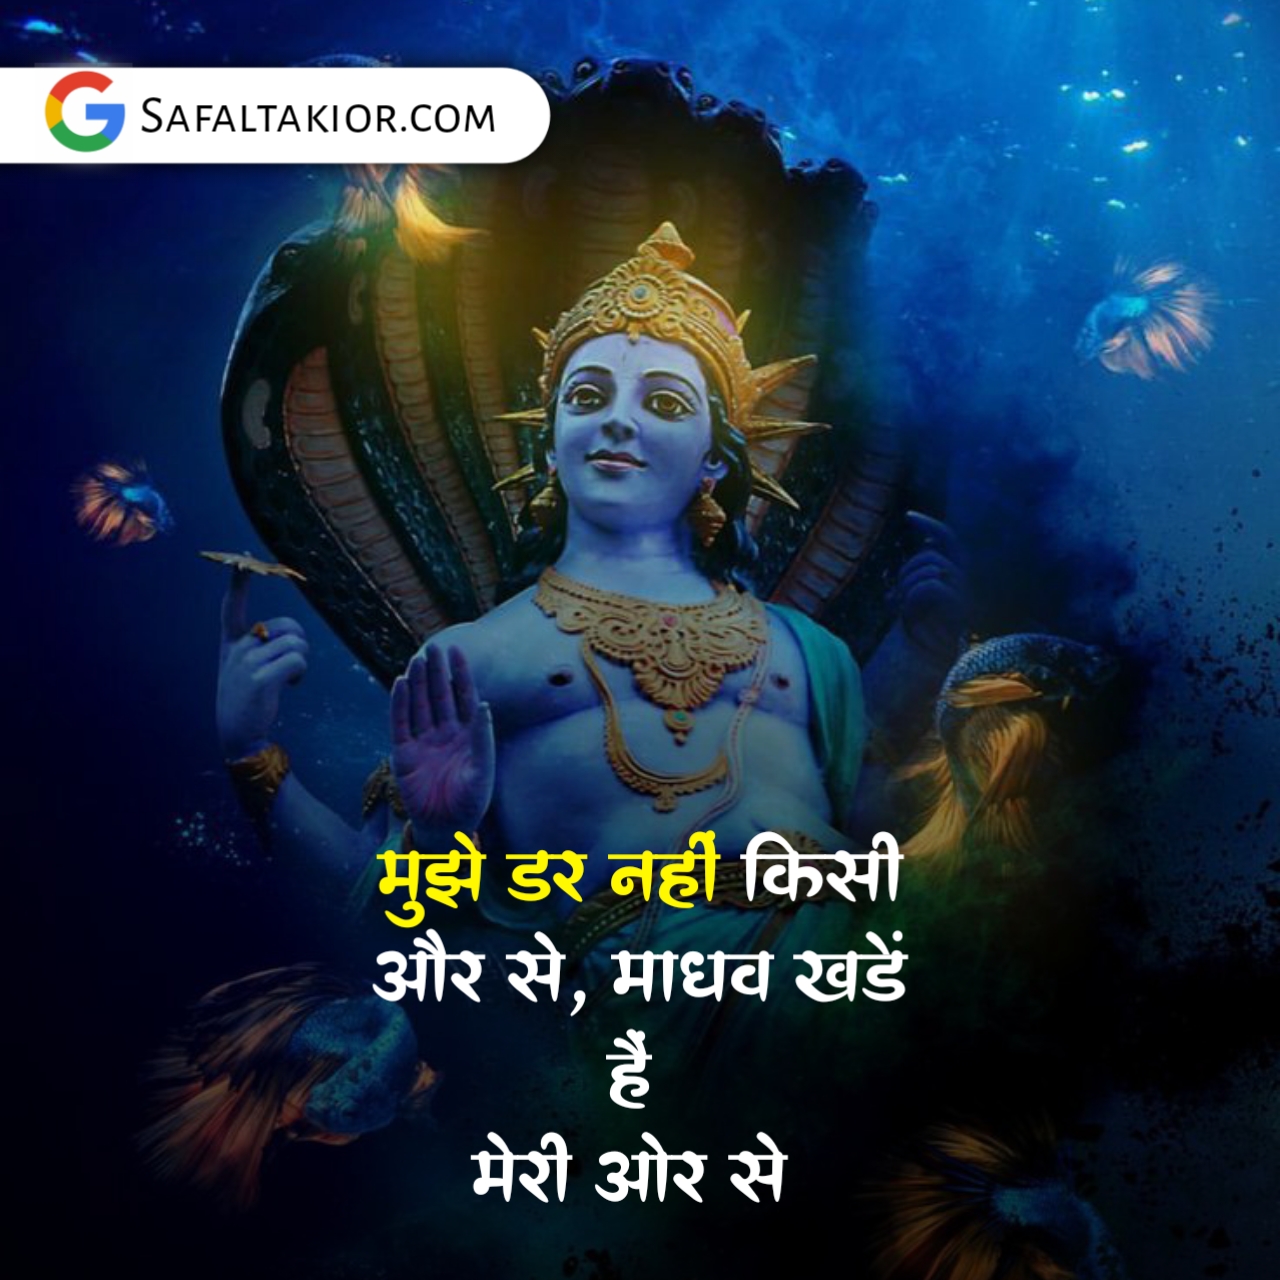 Geeta gyan quotes in